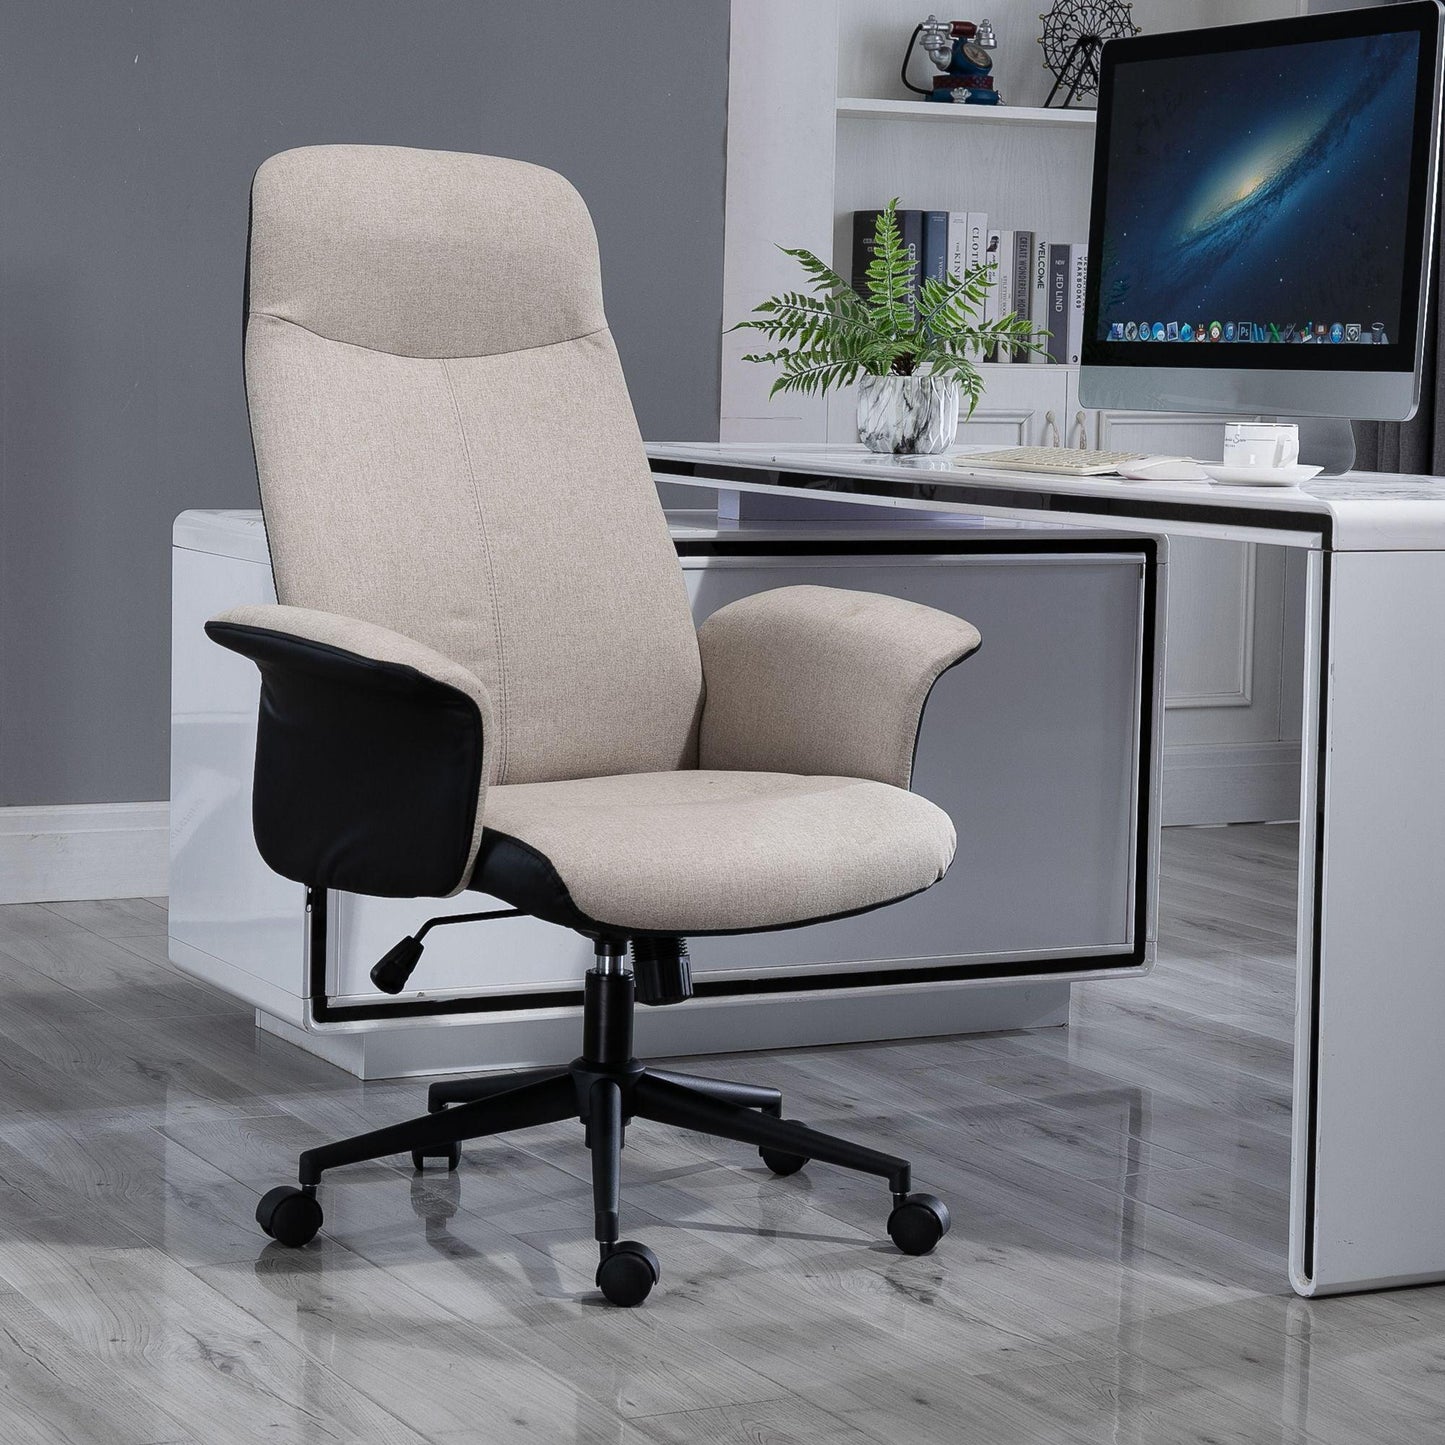 Vinsetto High Back Office Chair - Comfort and Style - ALL4U RETAILER LTD